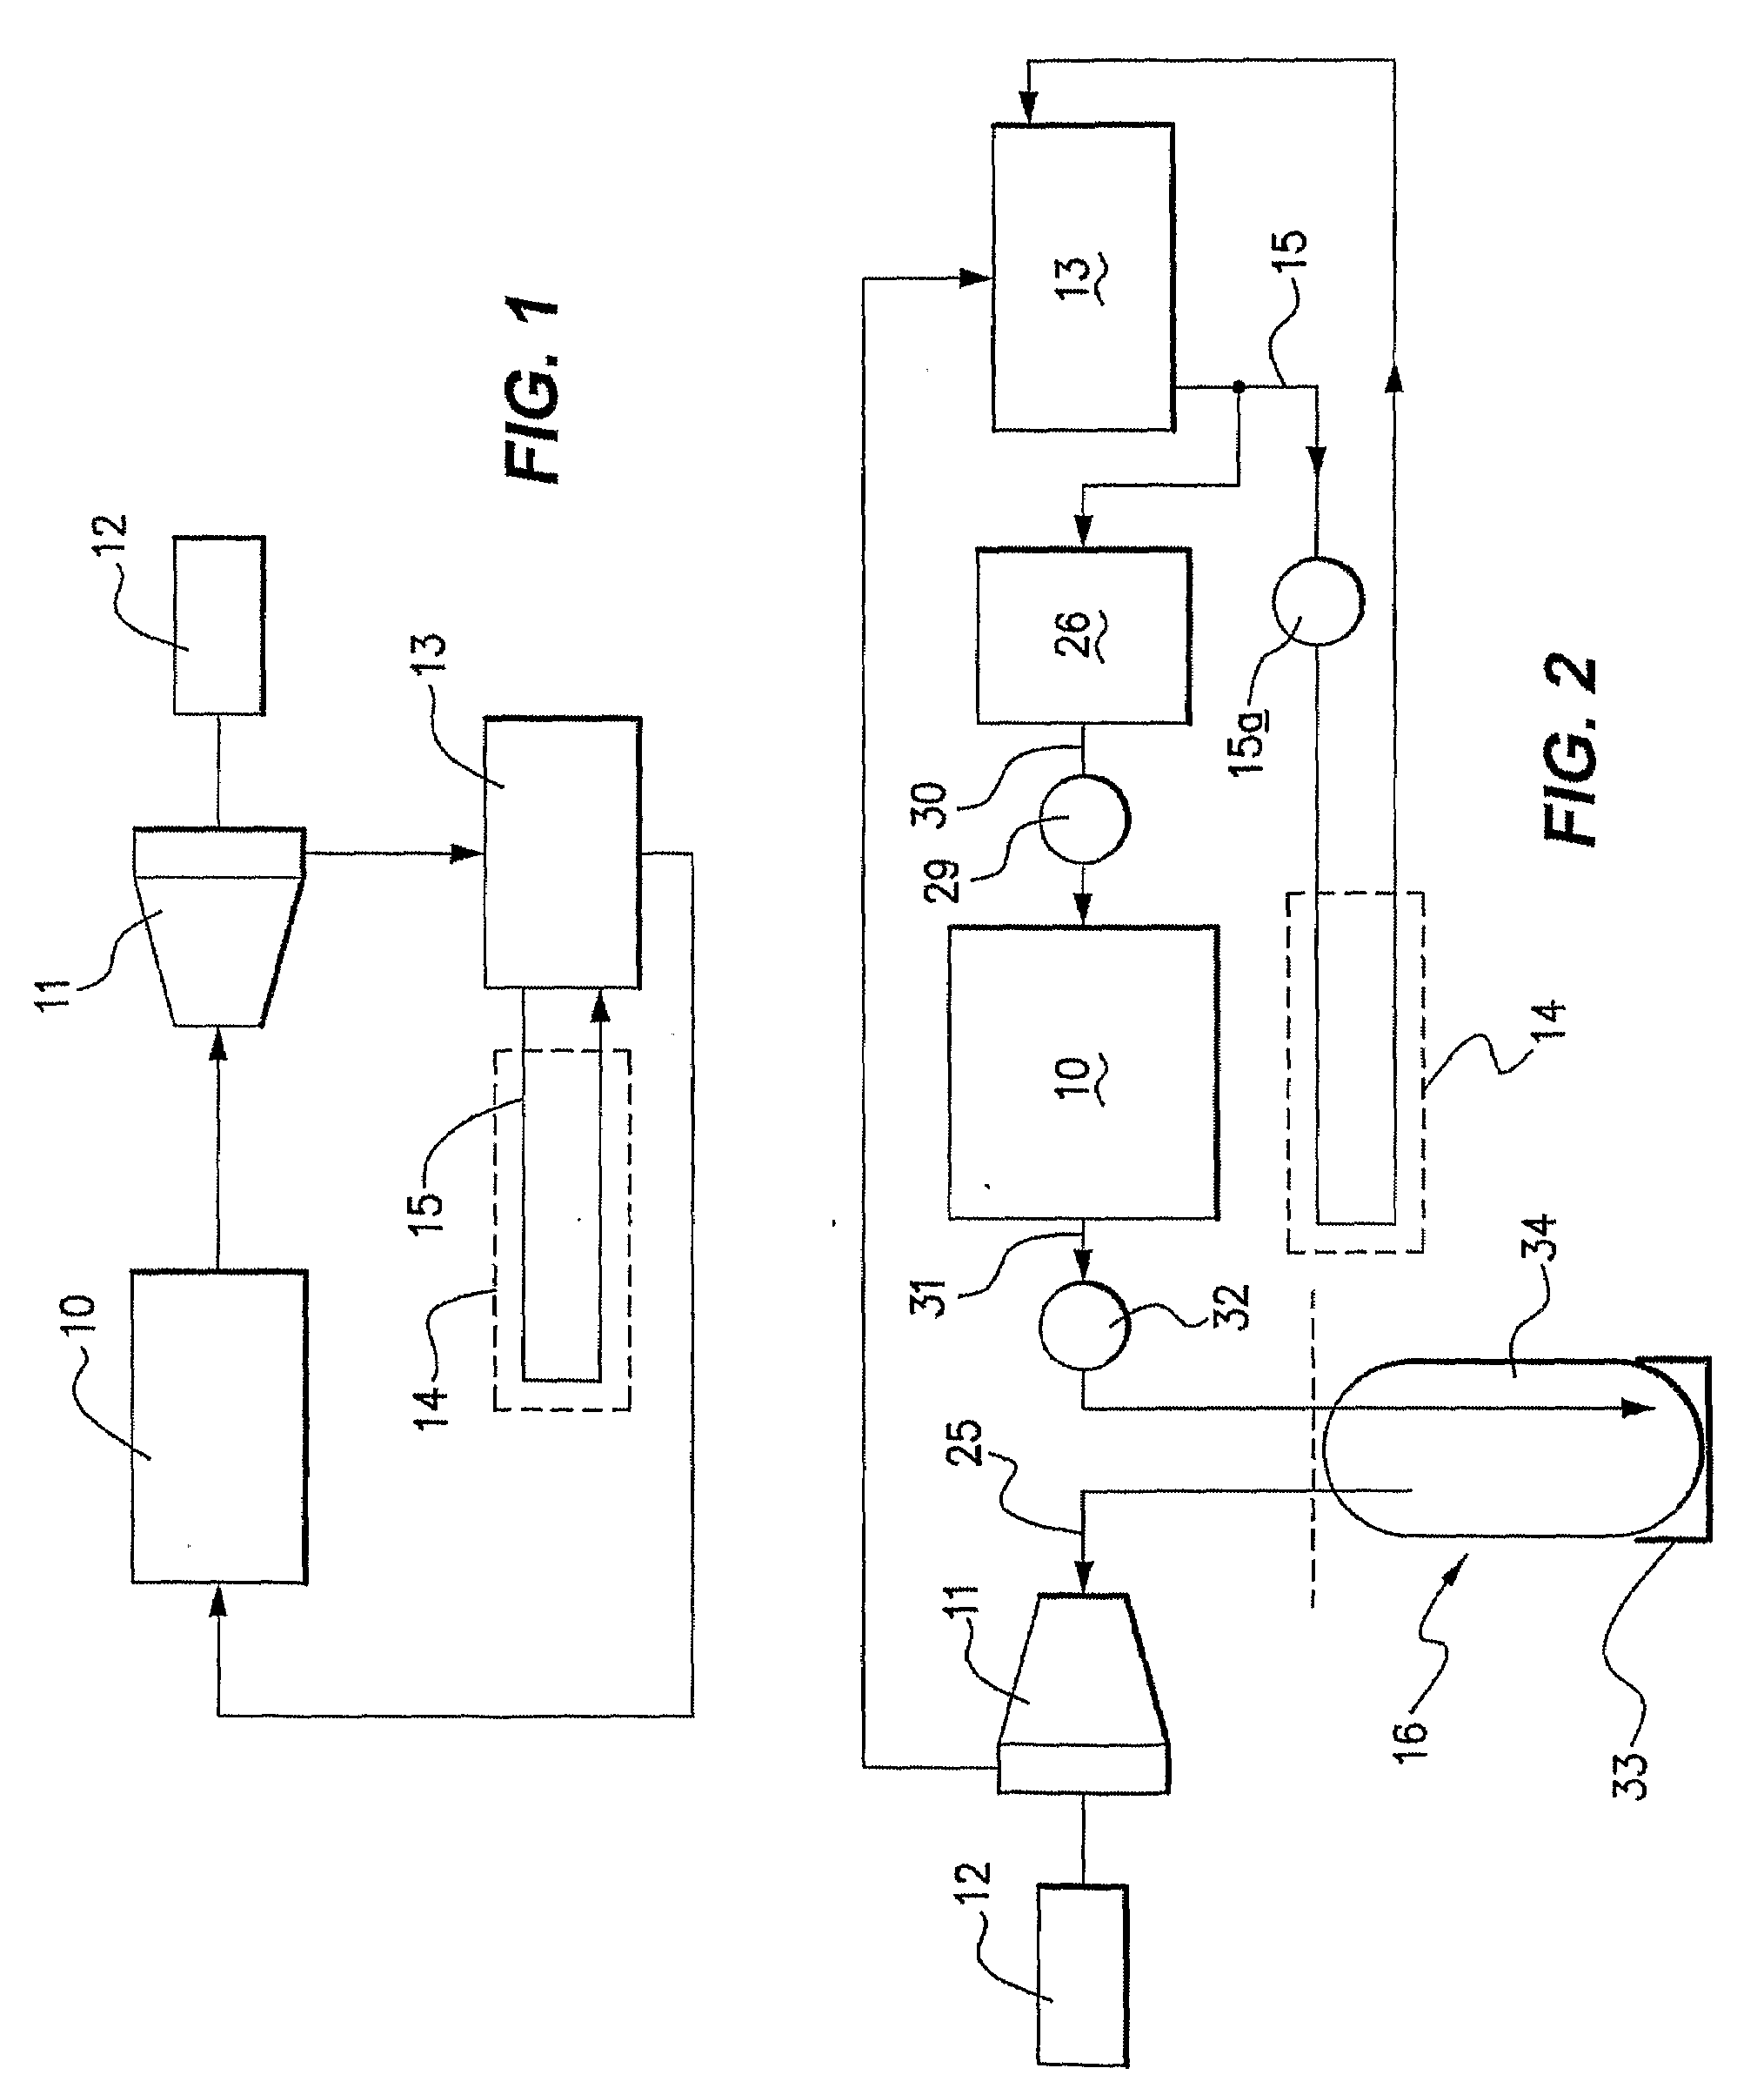 Thermal power plant incorporating subterranean cooling of condenser coolant